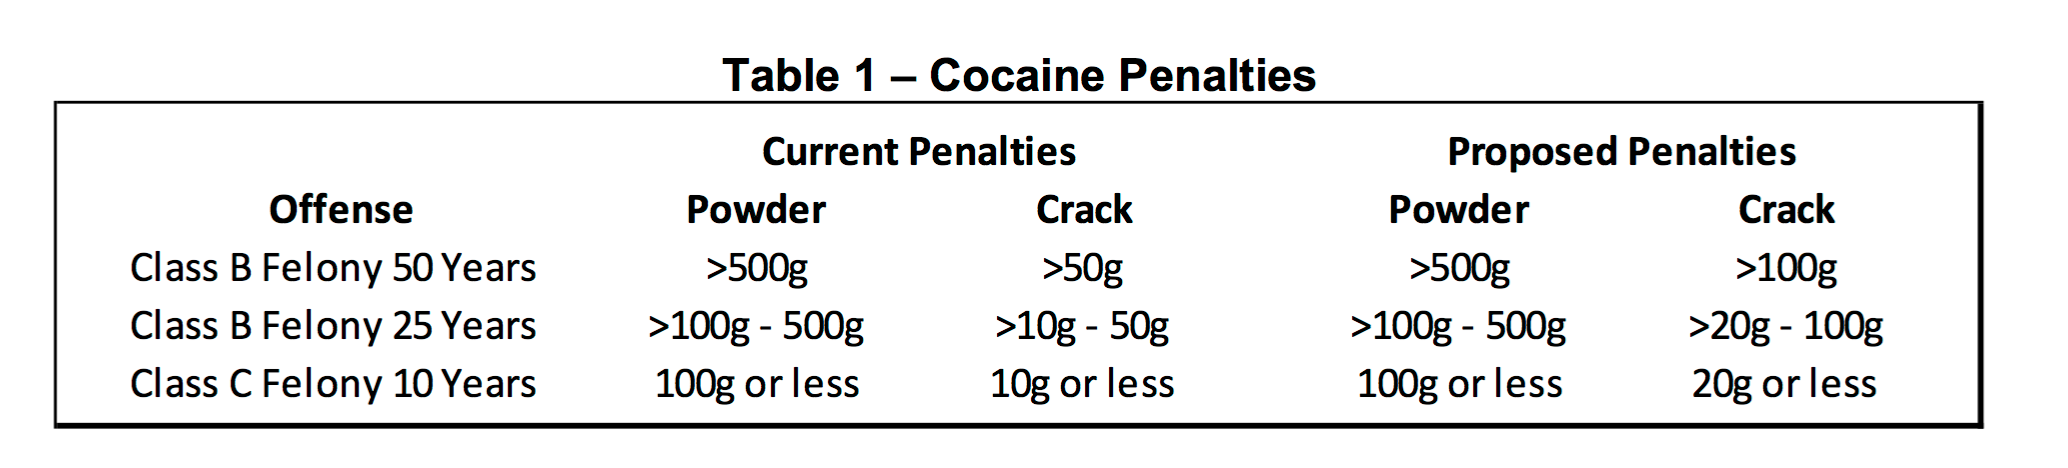 penalties for cocaine crimes in iowa